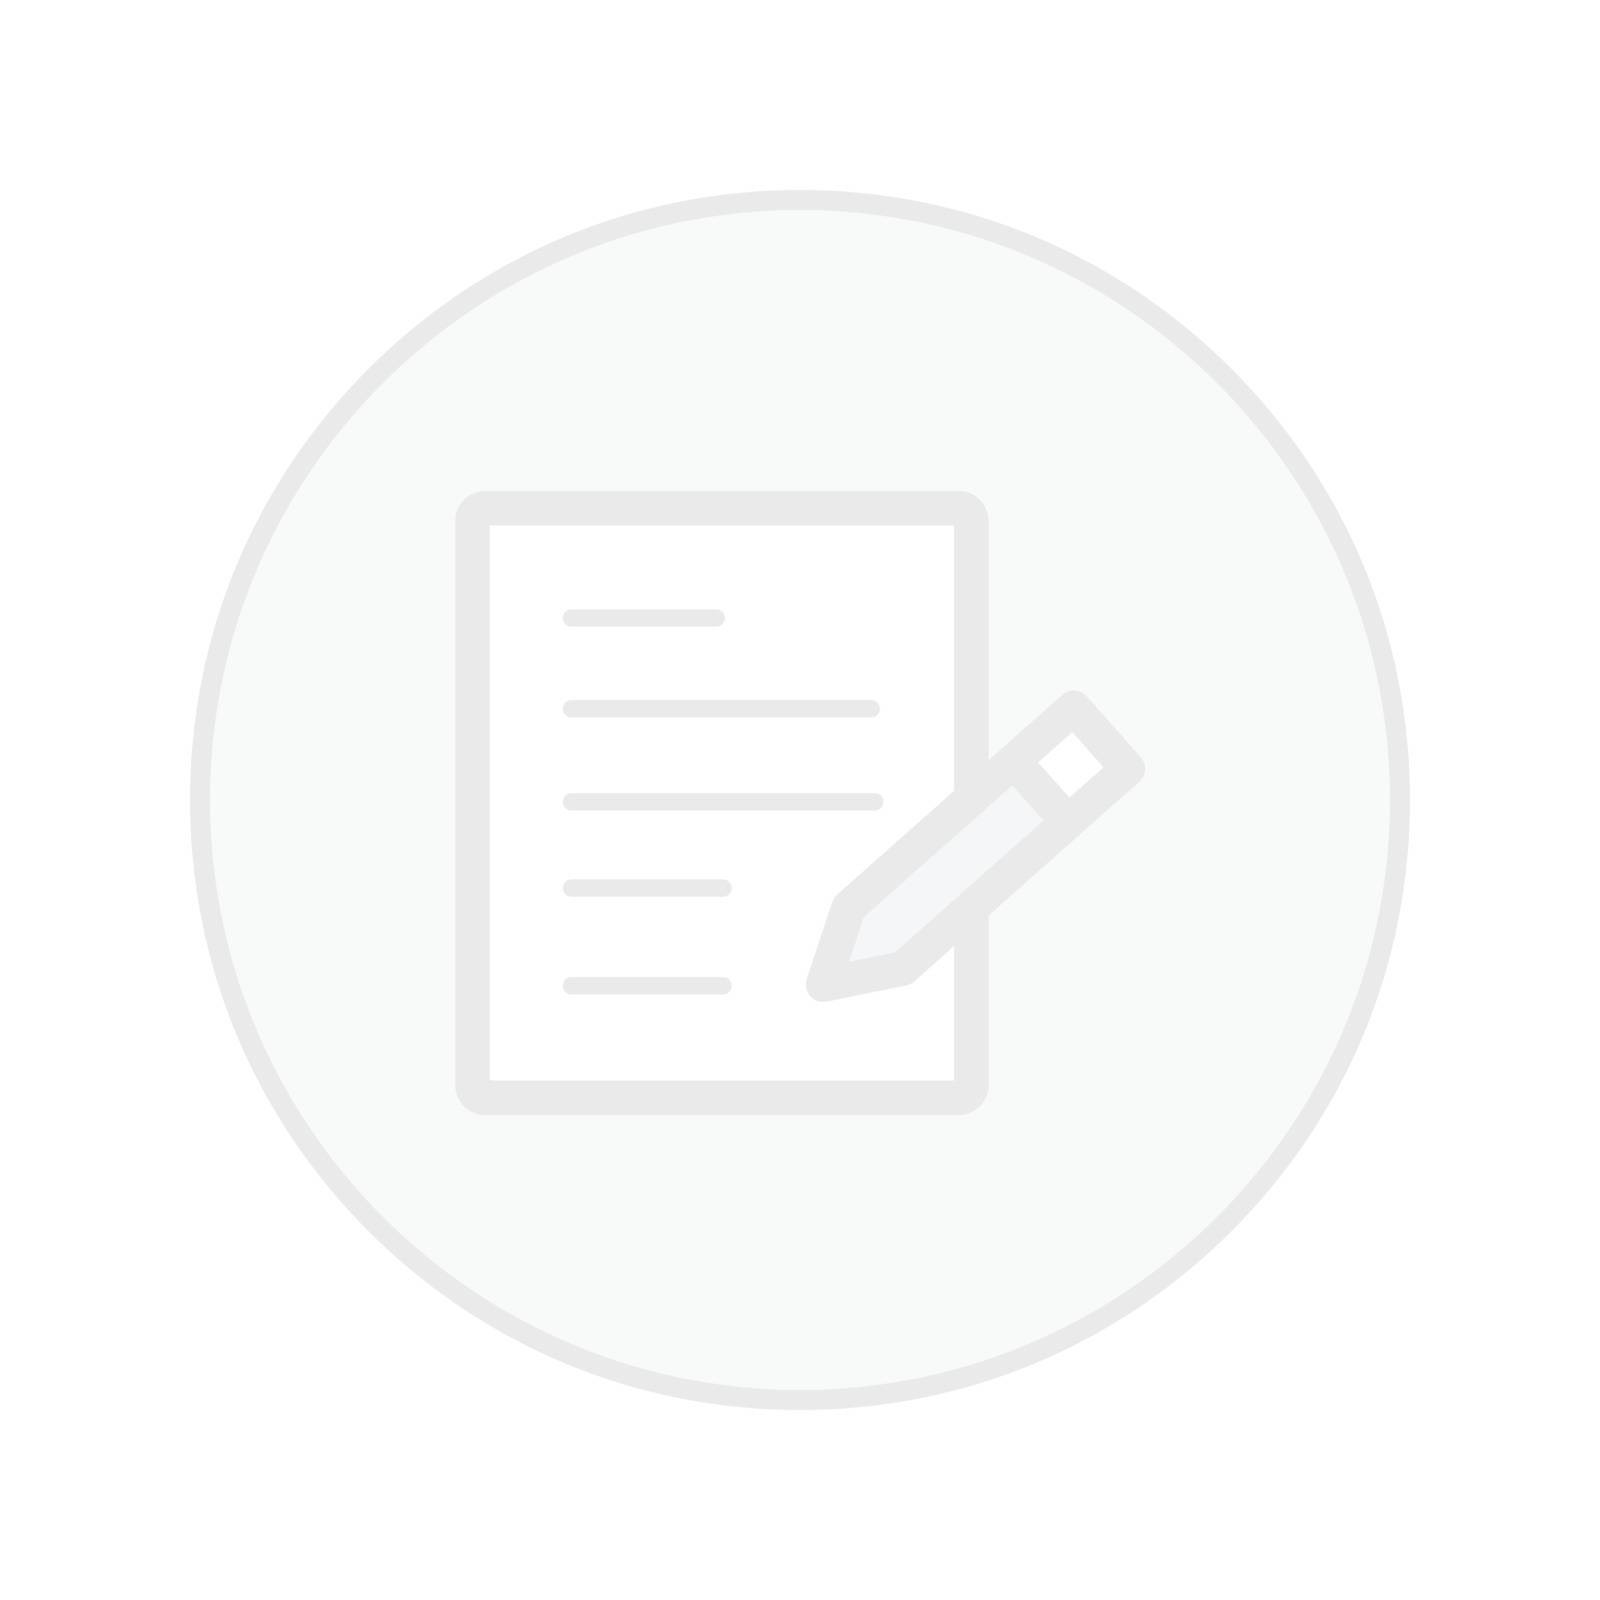 office paper with pencil  white button icon by PAPAGraph